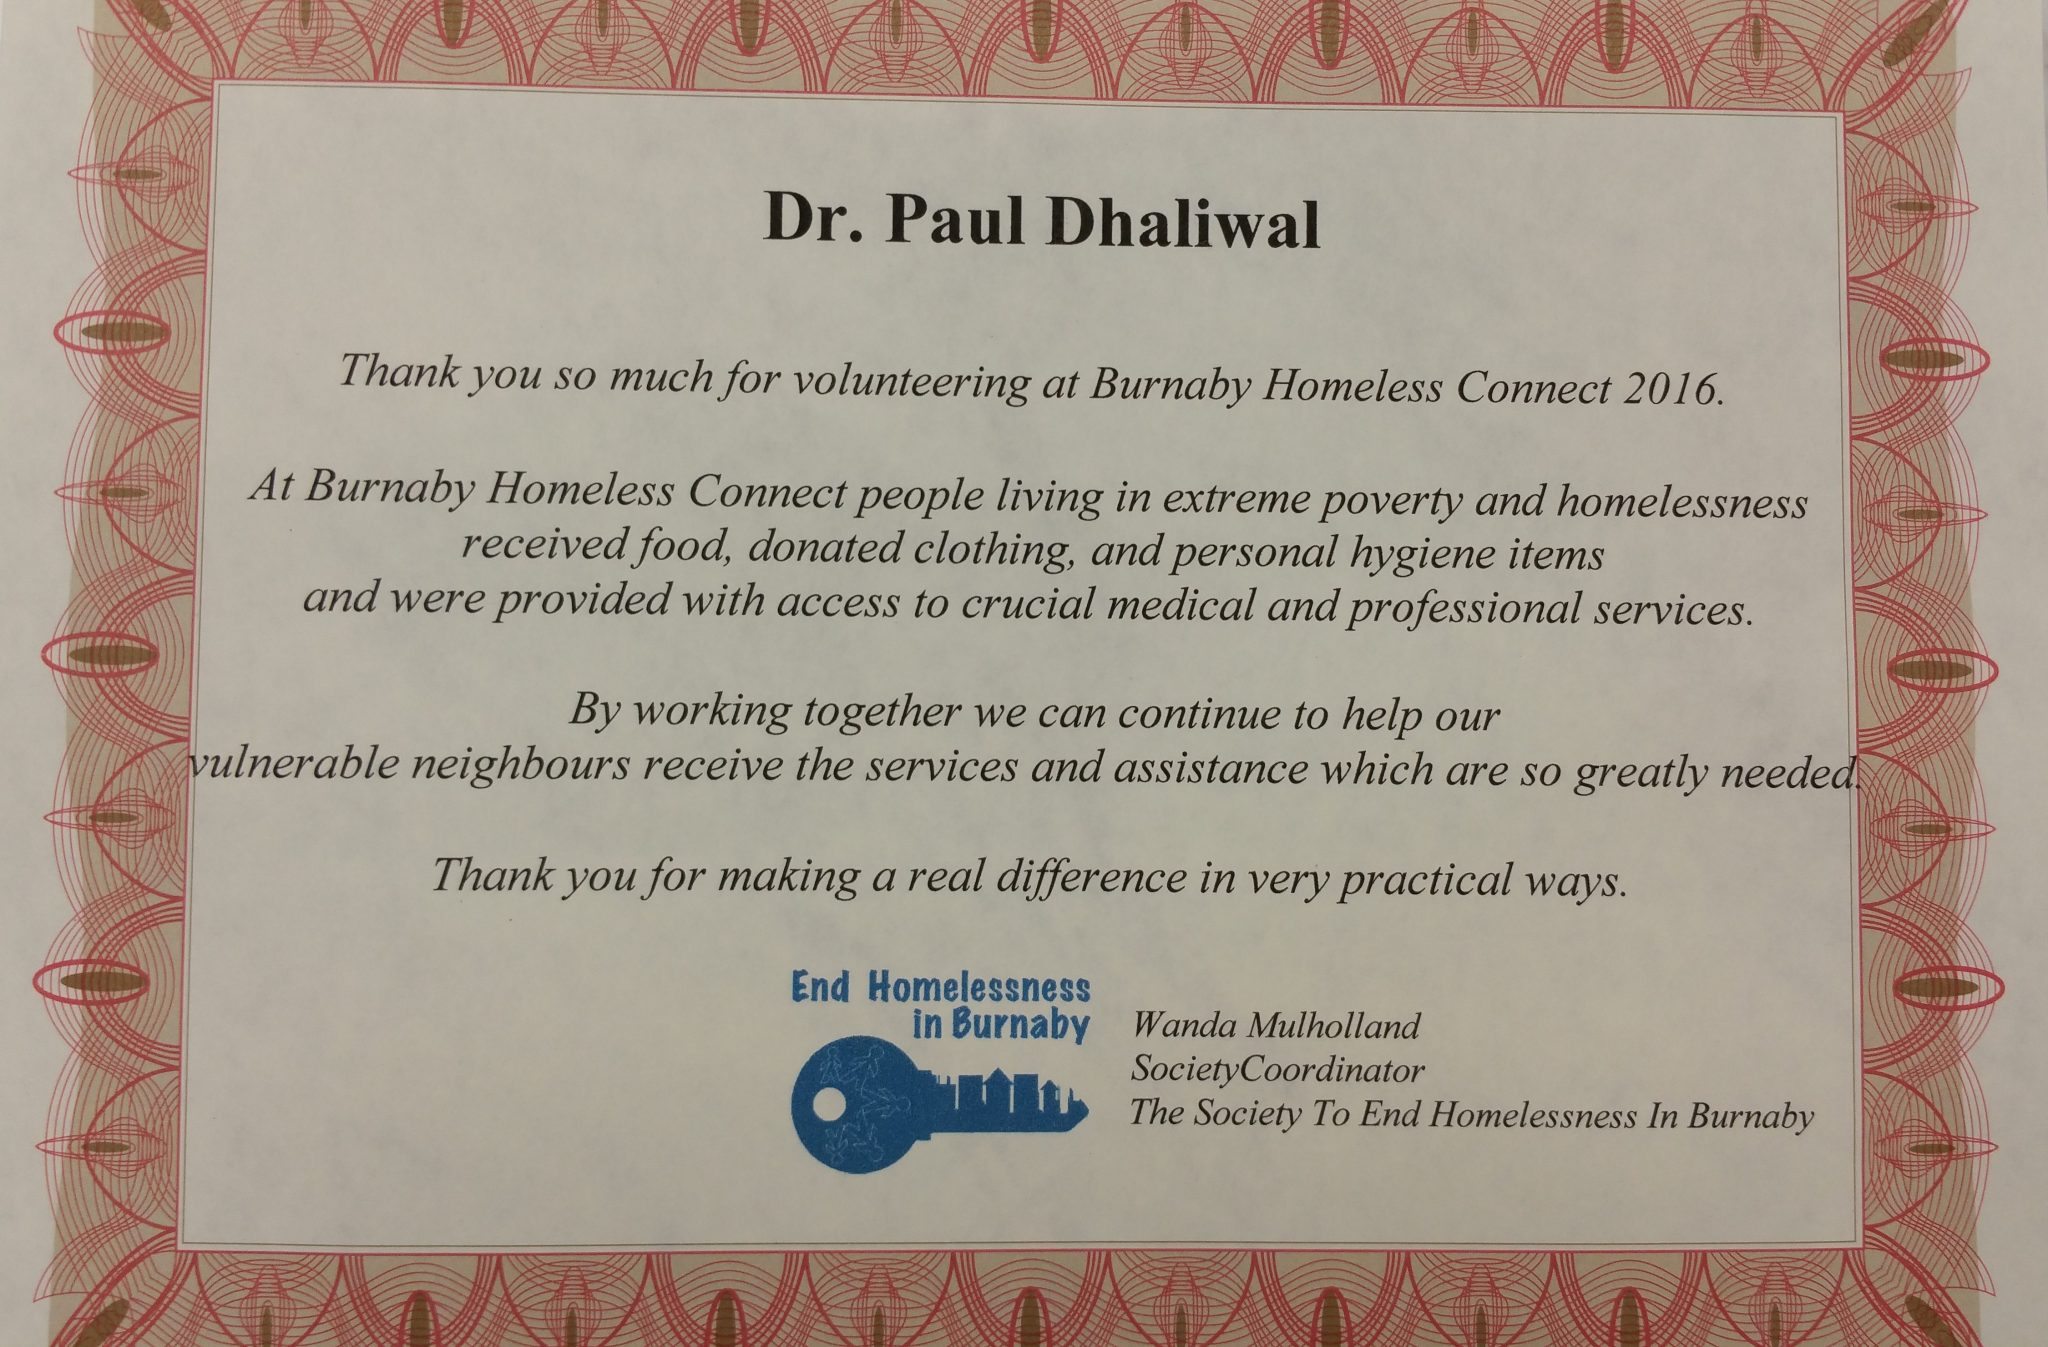 Dr. Paul Dhaliwal volunteers to support the Burnaby homeless